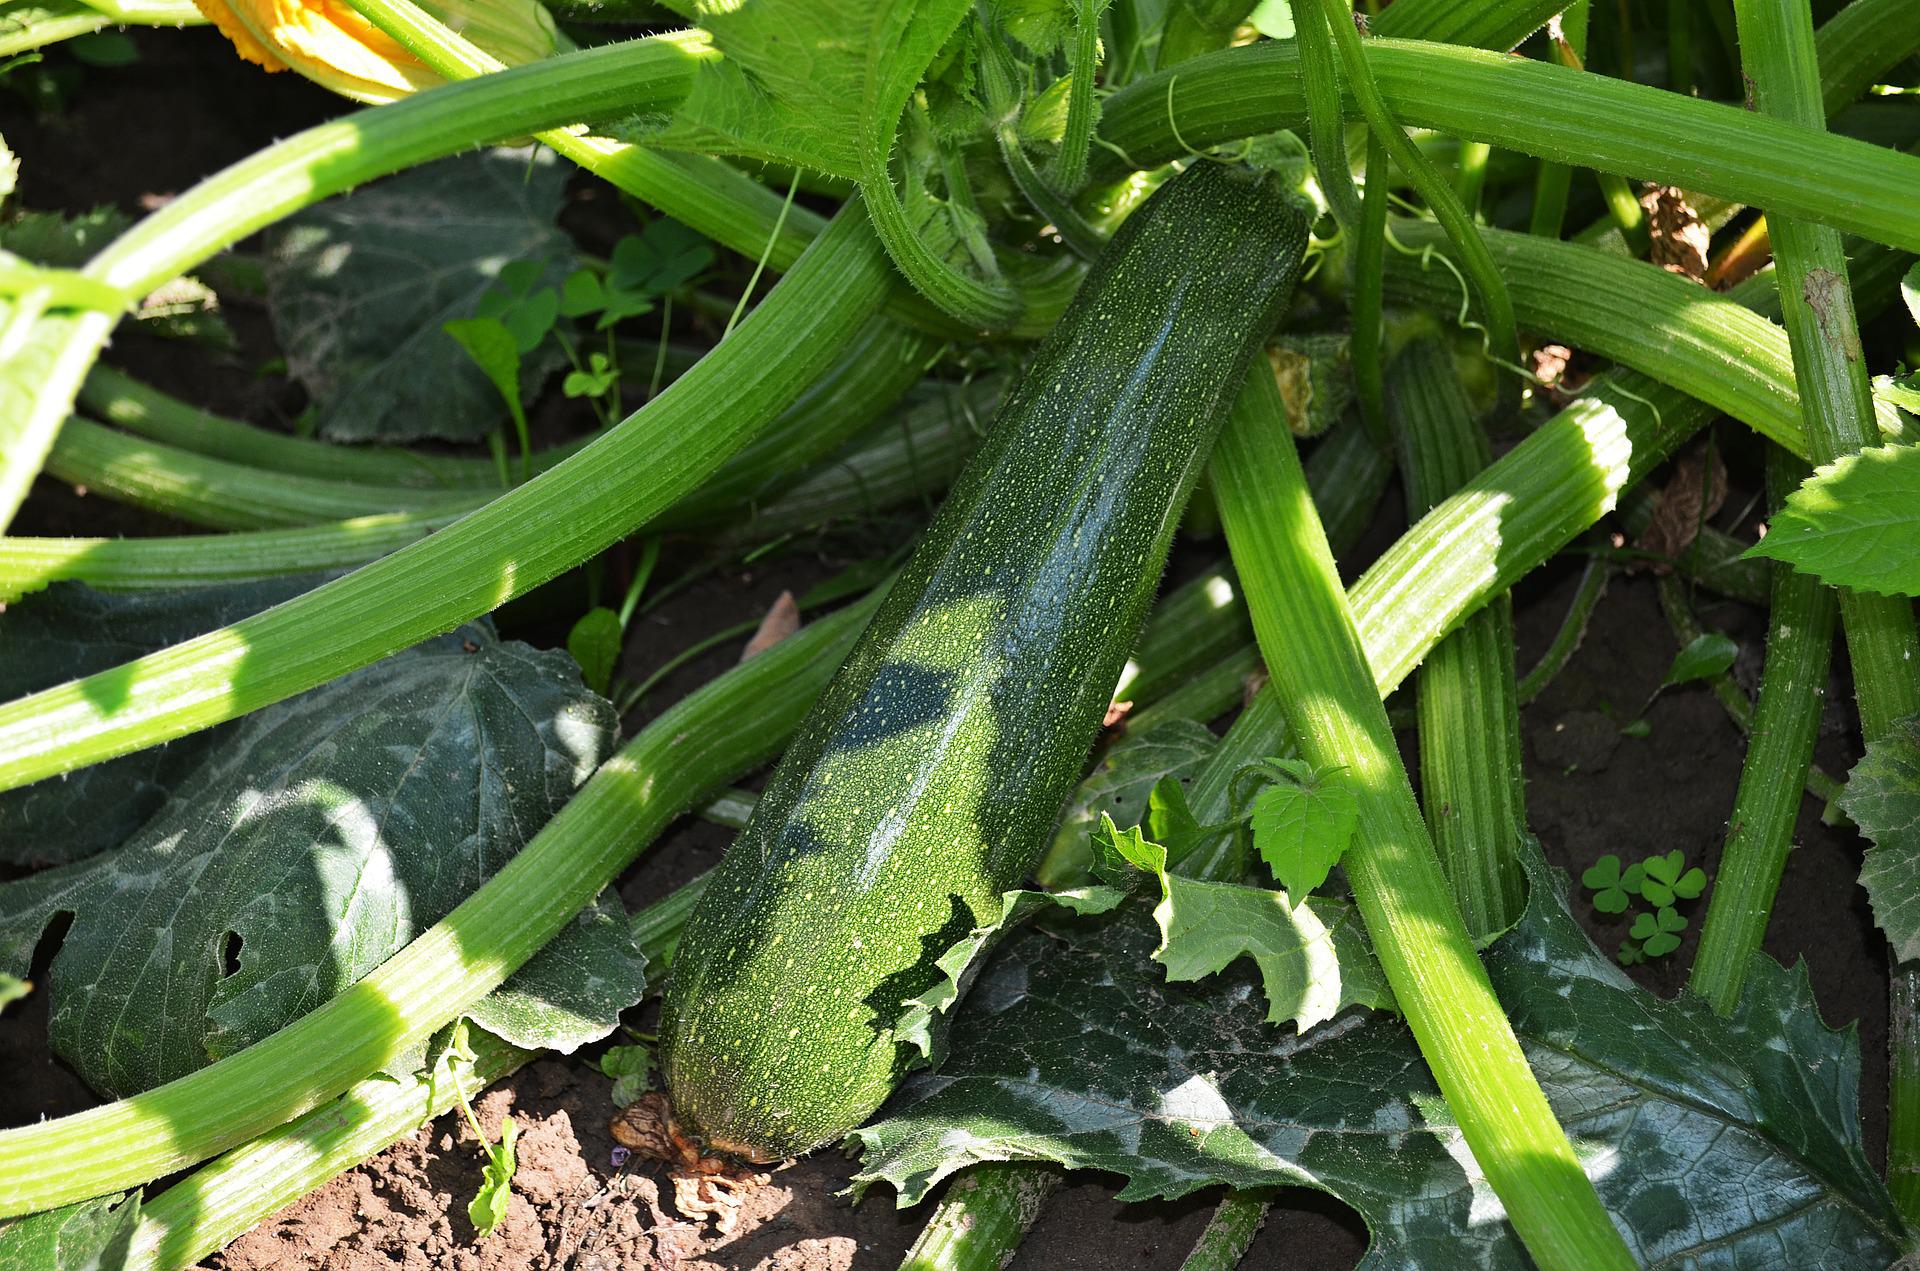 courgette-g671625a9a_1920